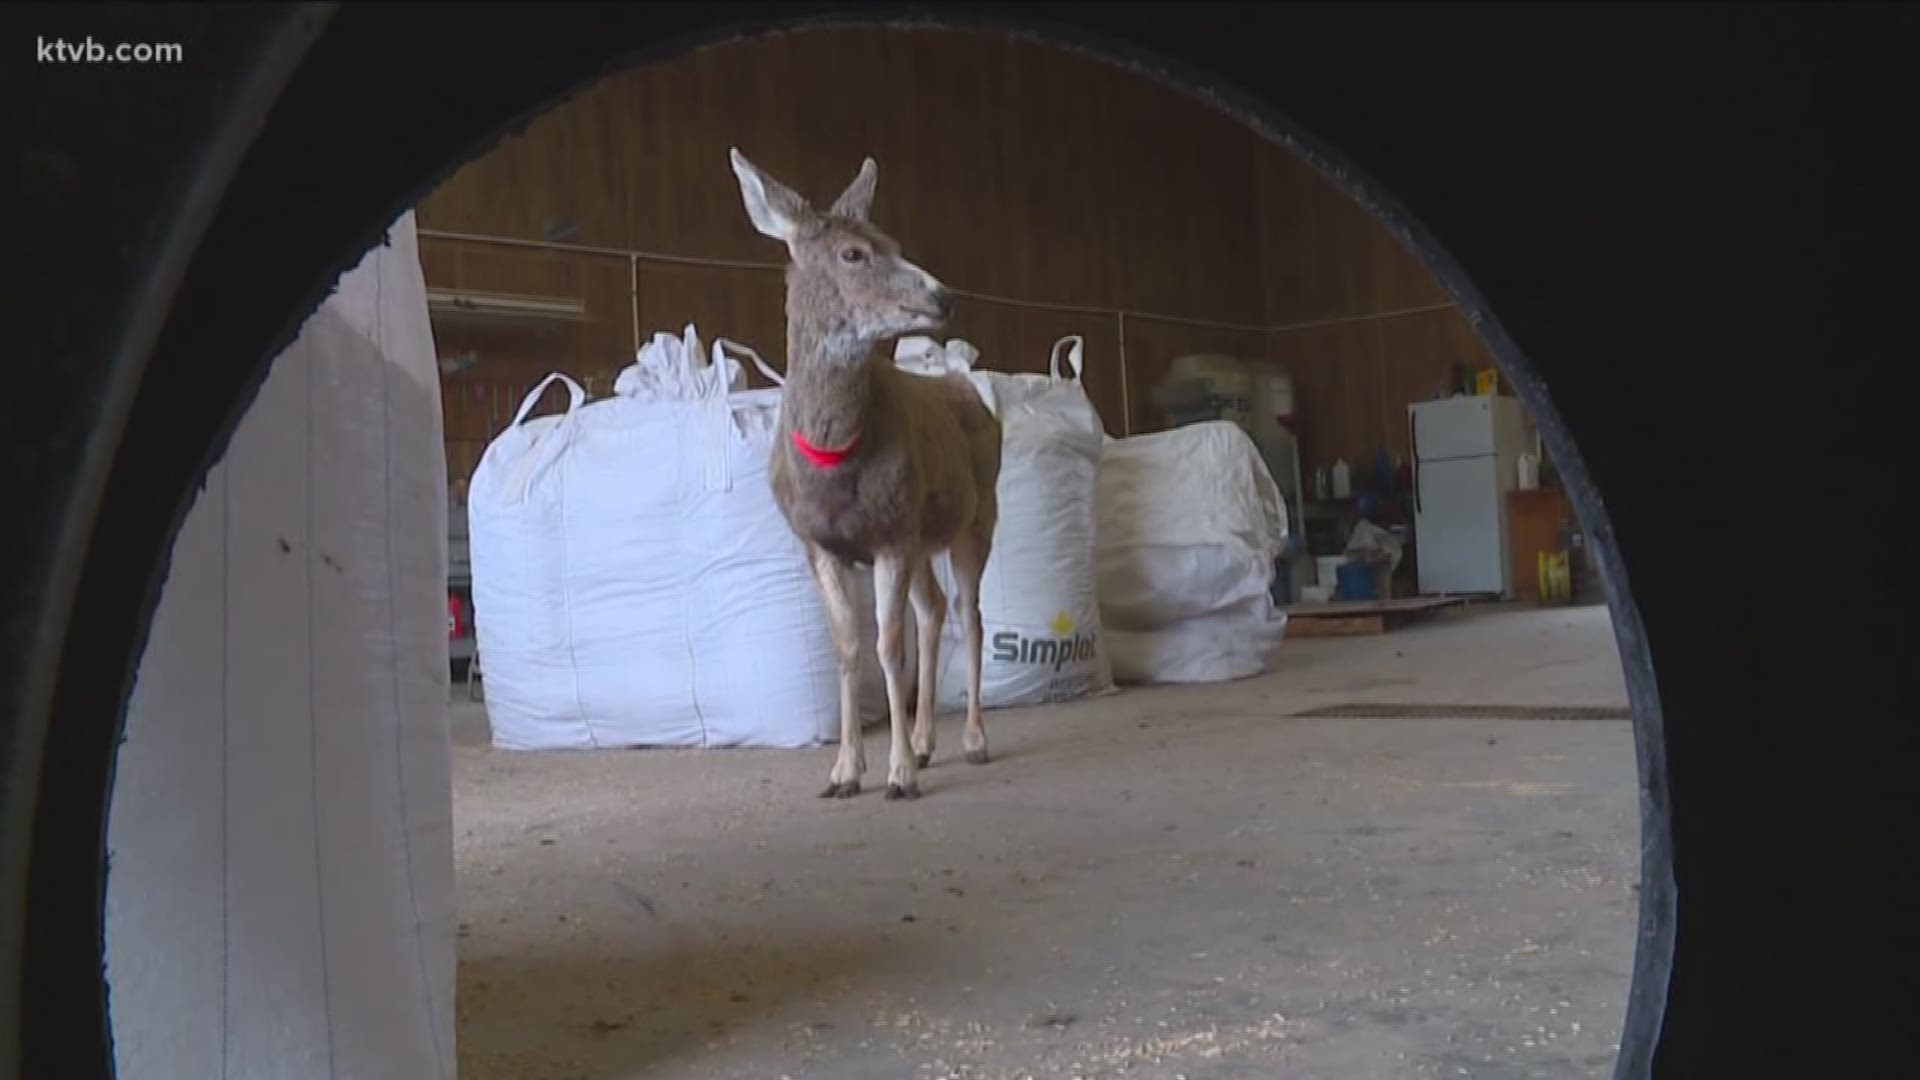 At Bar MB Ranches in Washington County, they feel blessed to have a pet deer. However, they wouldn't recommend it to others.